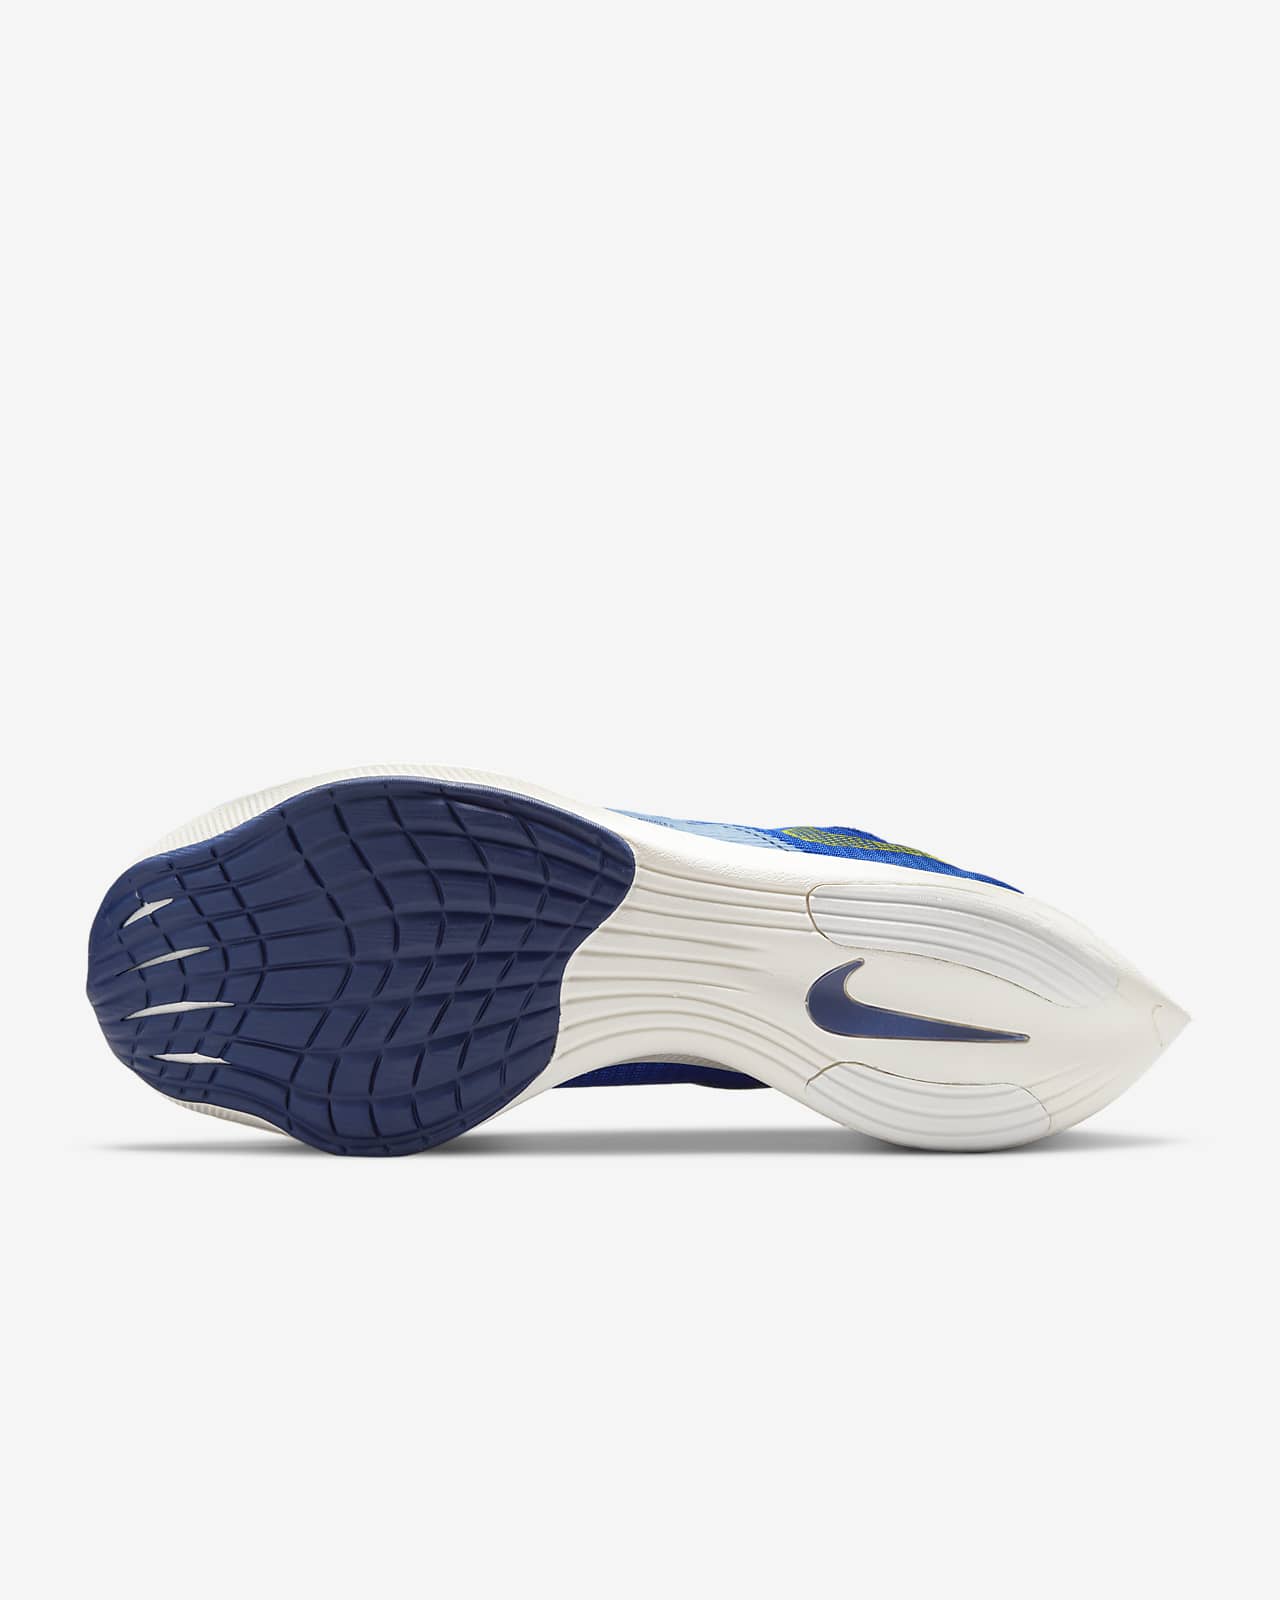 Nike ZoomX Vaporfly NEXT% 2 Men's Road Racing Shoes.